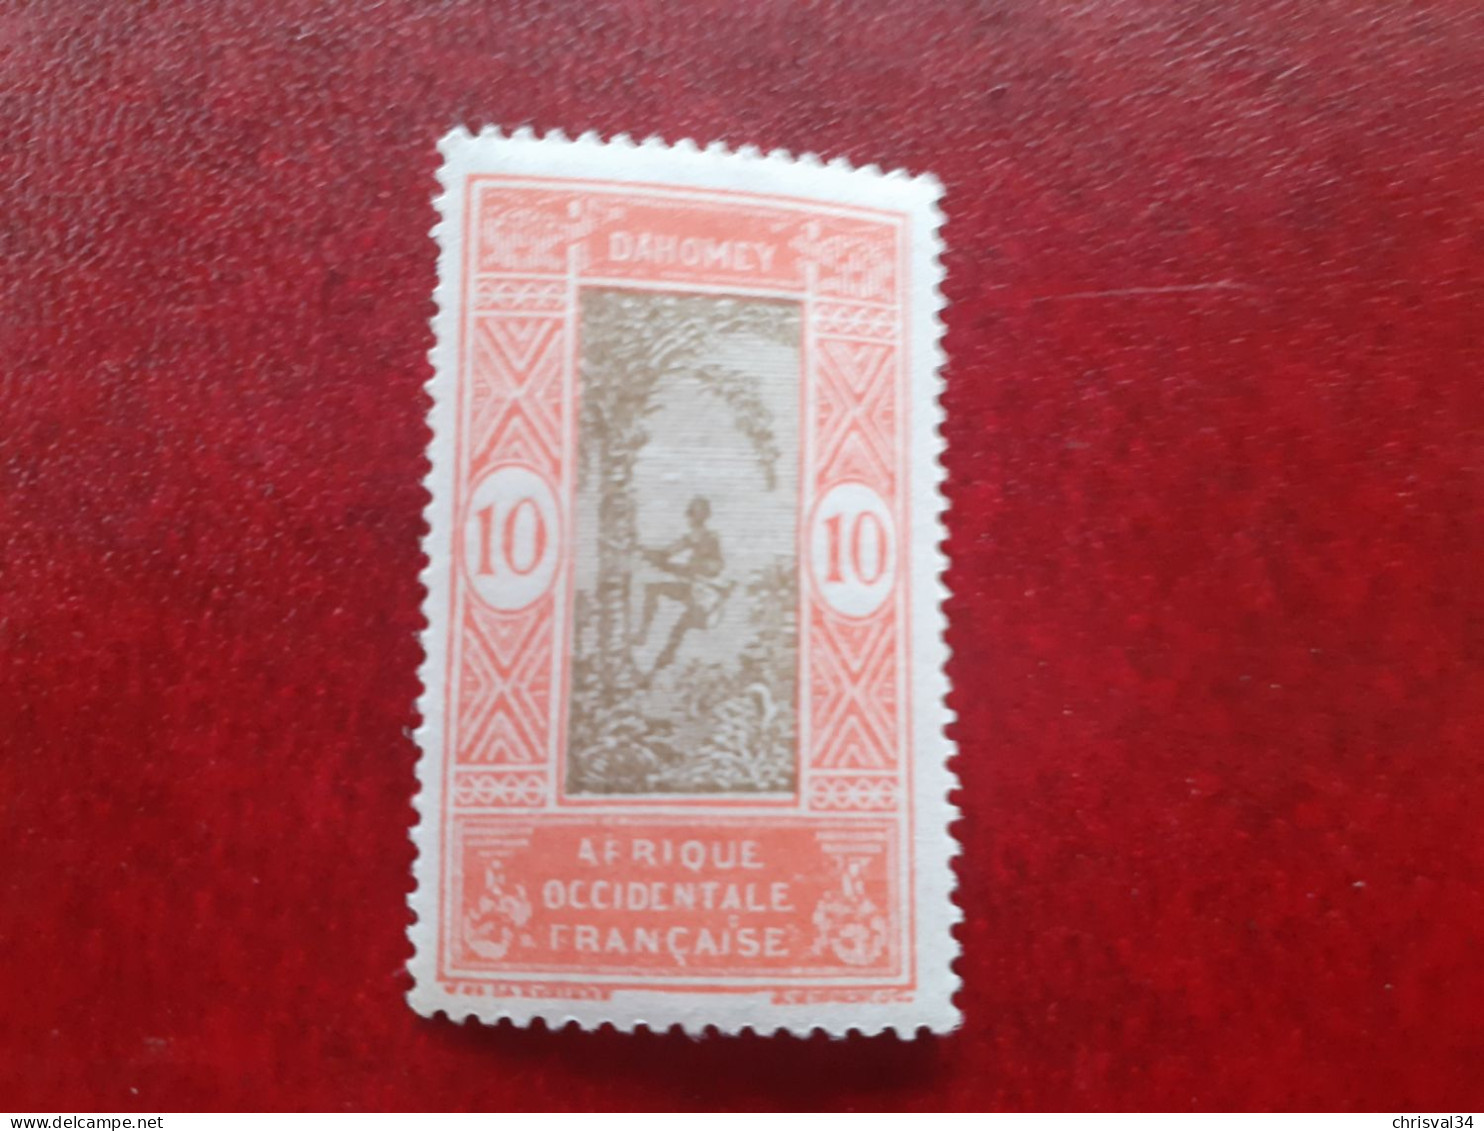 TIMBRE   DAHOMEY       N  70      COTE  0,50  EUROS   NEUF  SG - Unused Stamps